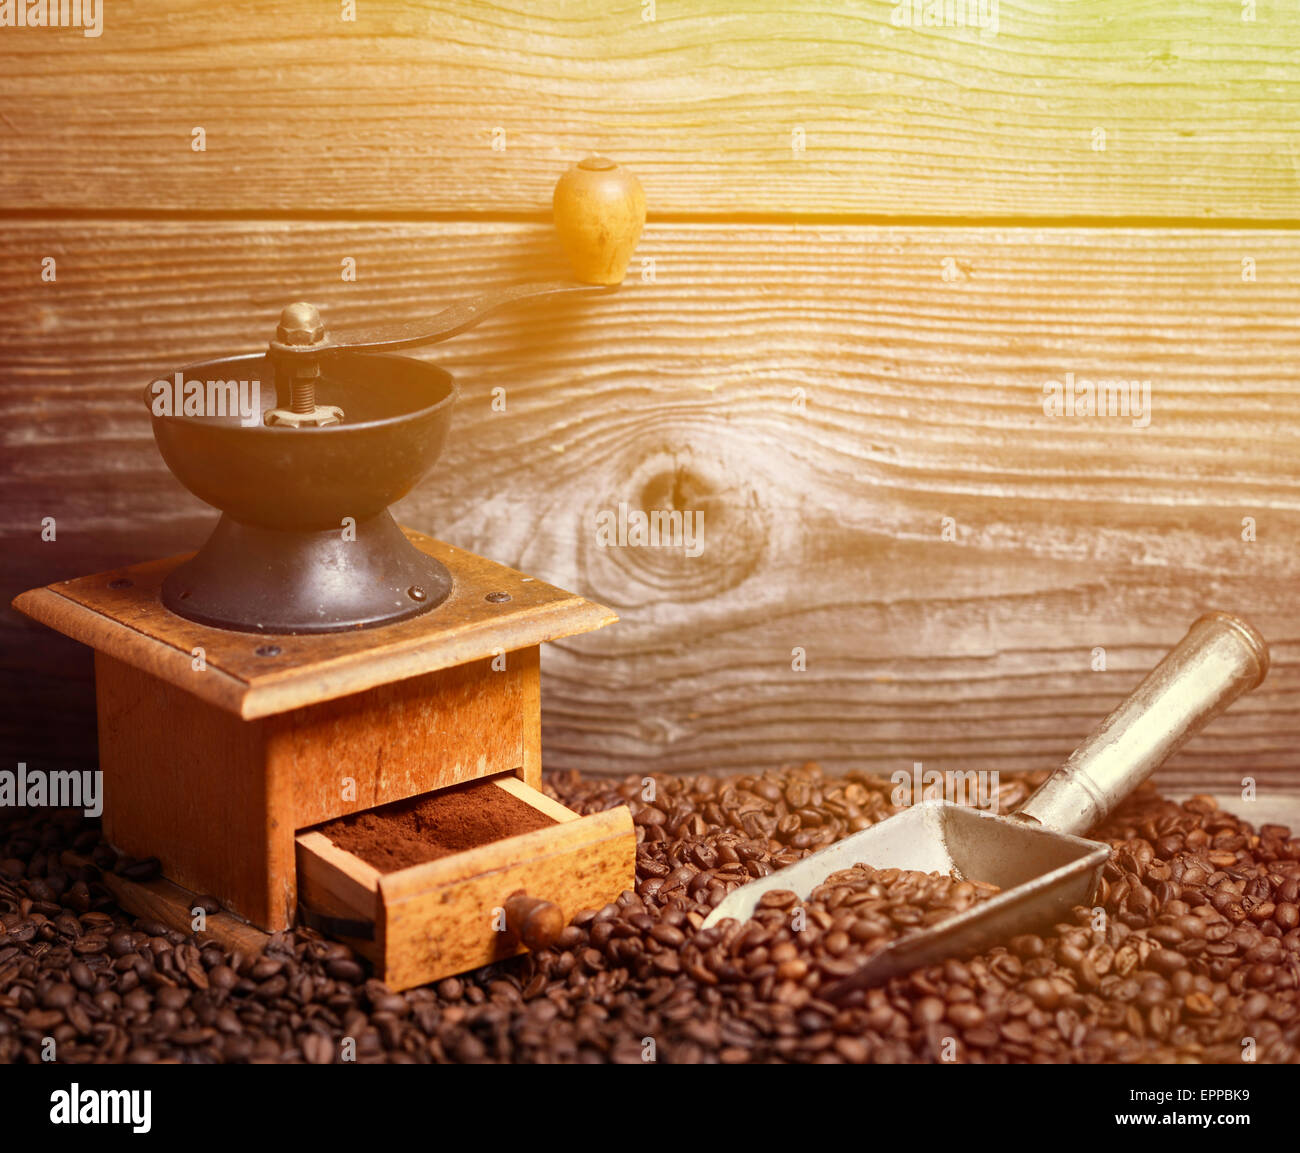 https://c8.alamy.com/comp/EPPBK9/manual-coffee-grinder-with-beans-and-vintage-scoop-on-wooden-background-EPPBK9.jpg